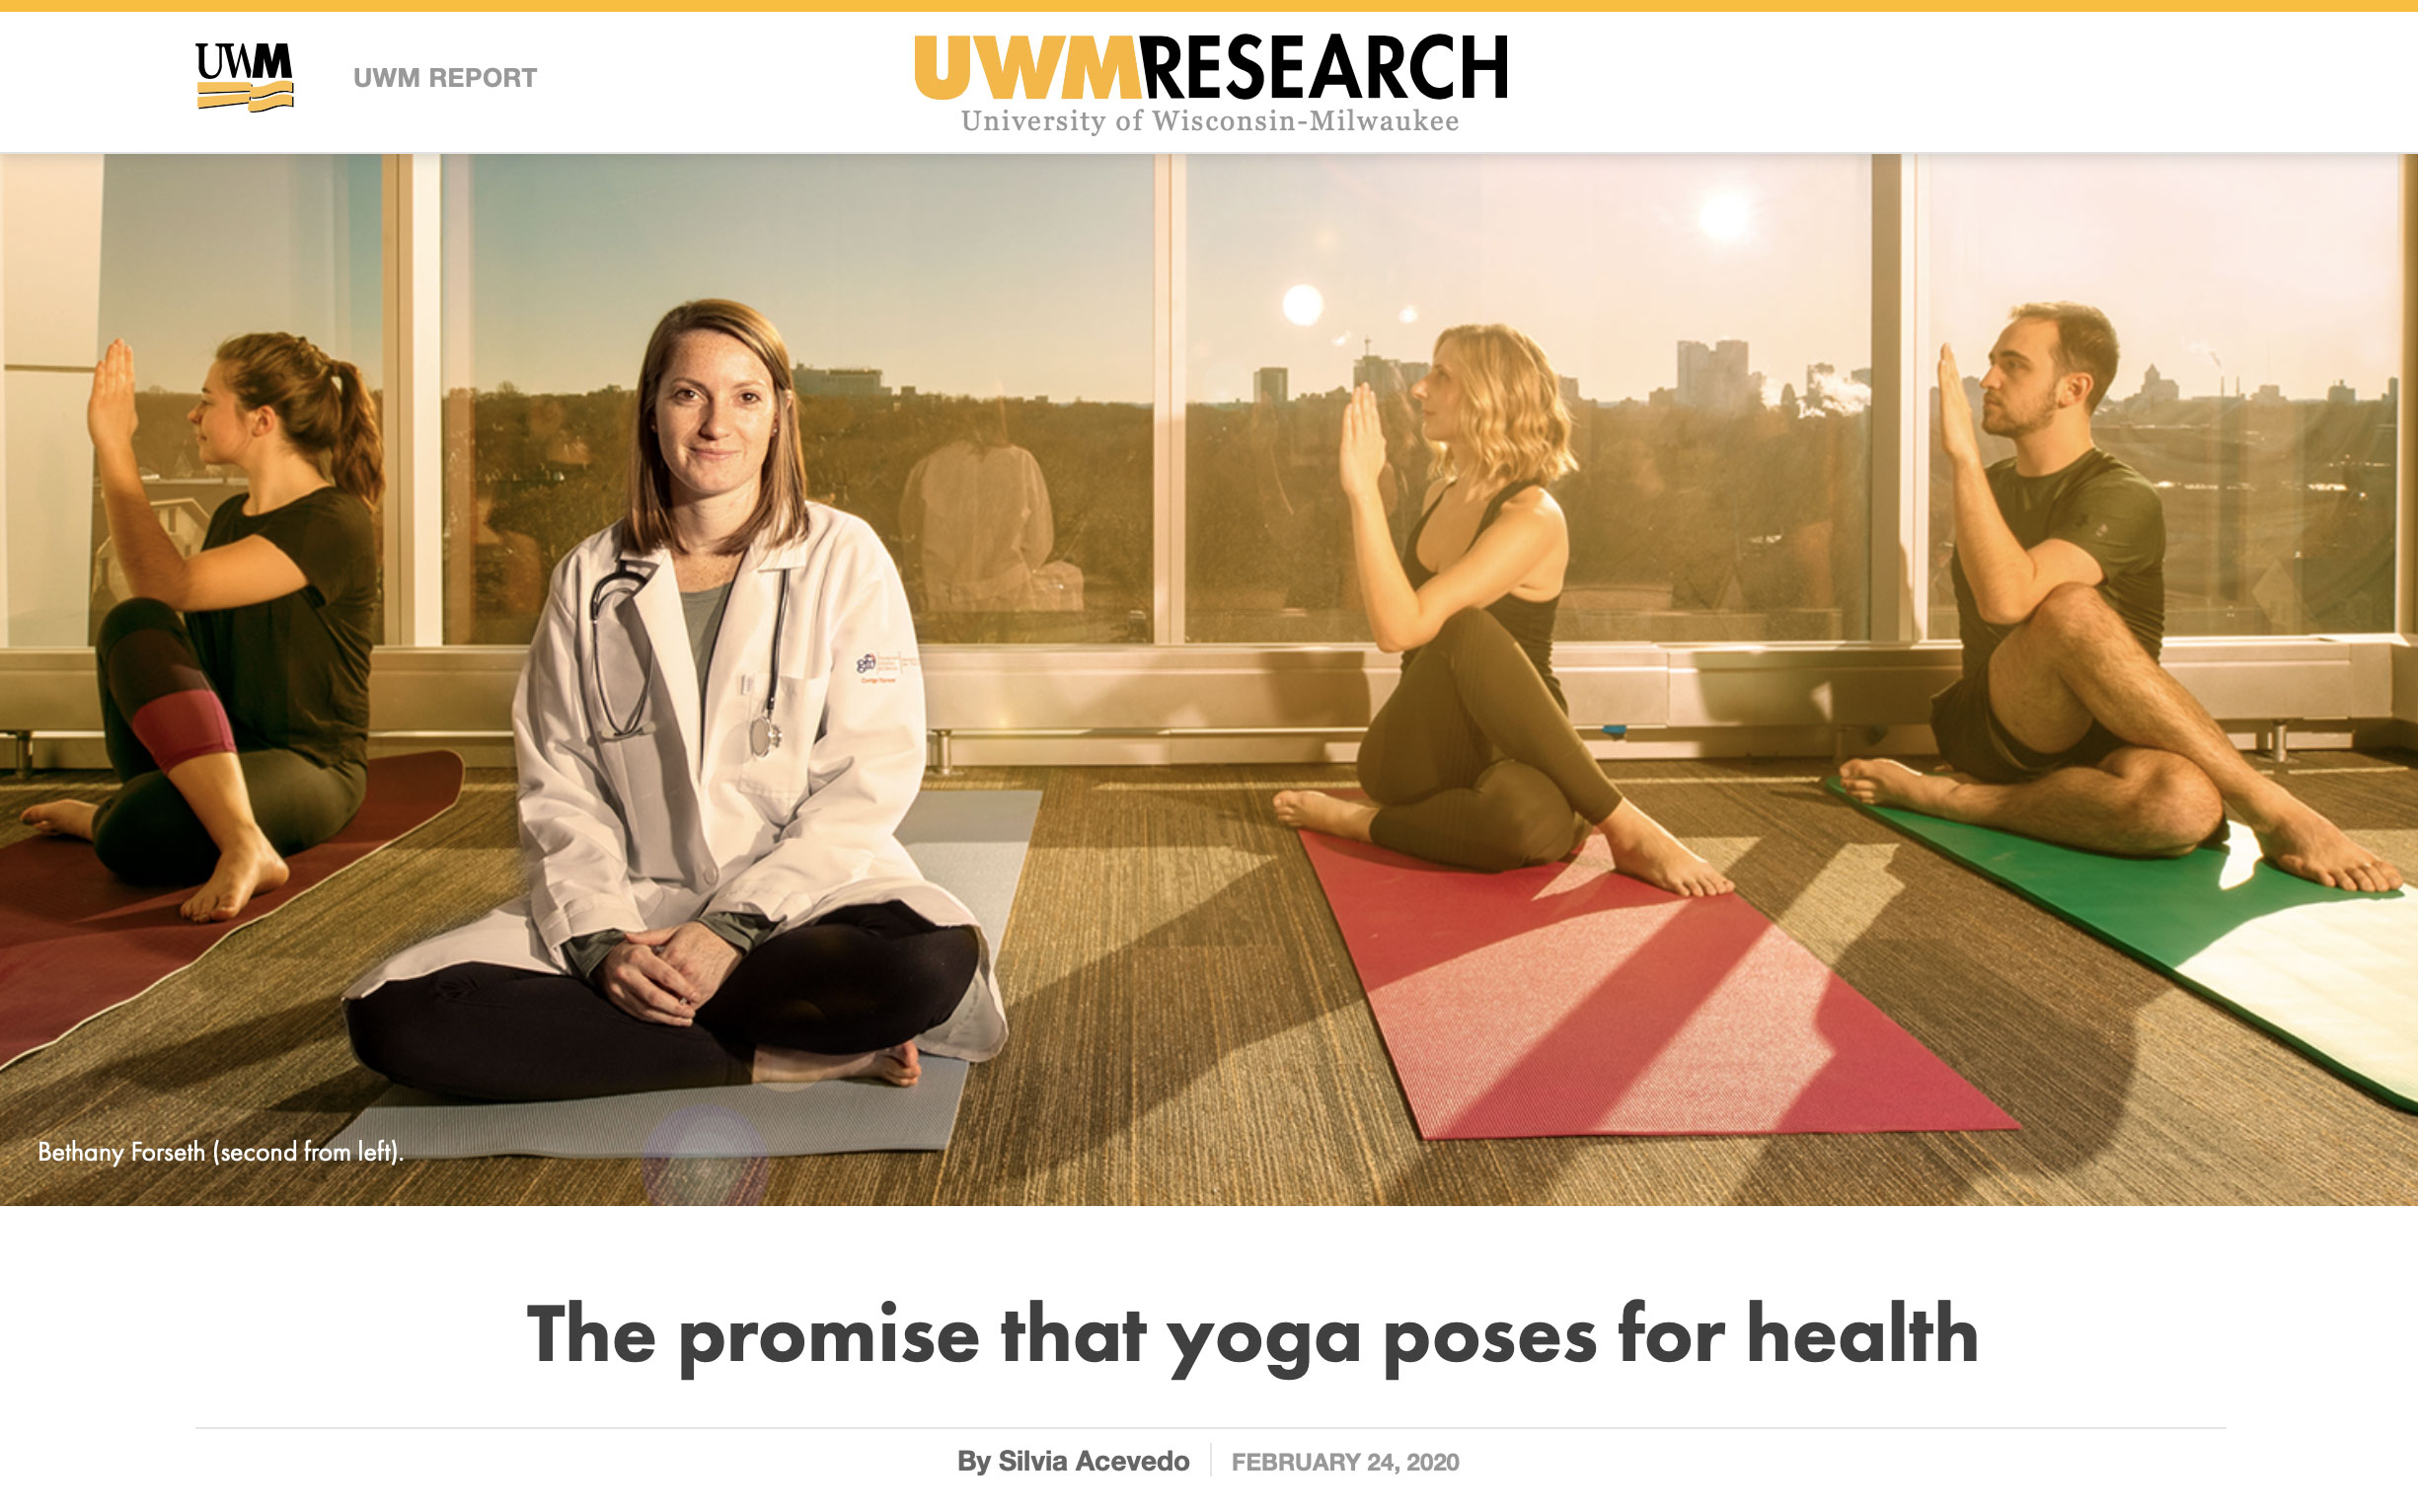 Image shows four people on yoga mats, one being the doctoral student studying yoga's effects on health. Image accompanies UWM Research magazine article entitled "The promise the yoga poses for health" written by Silvia Acevedo